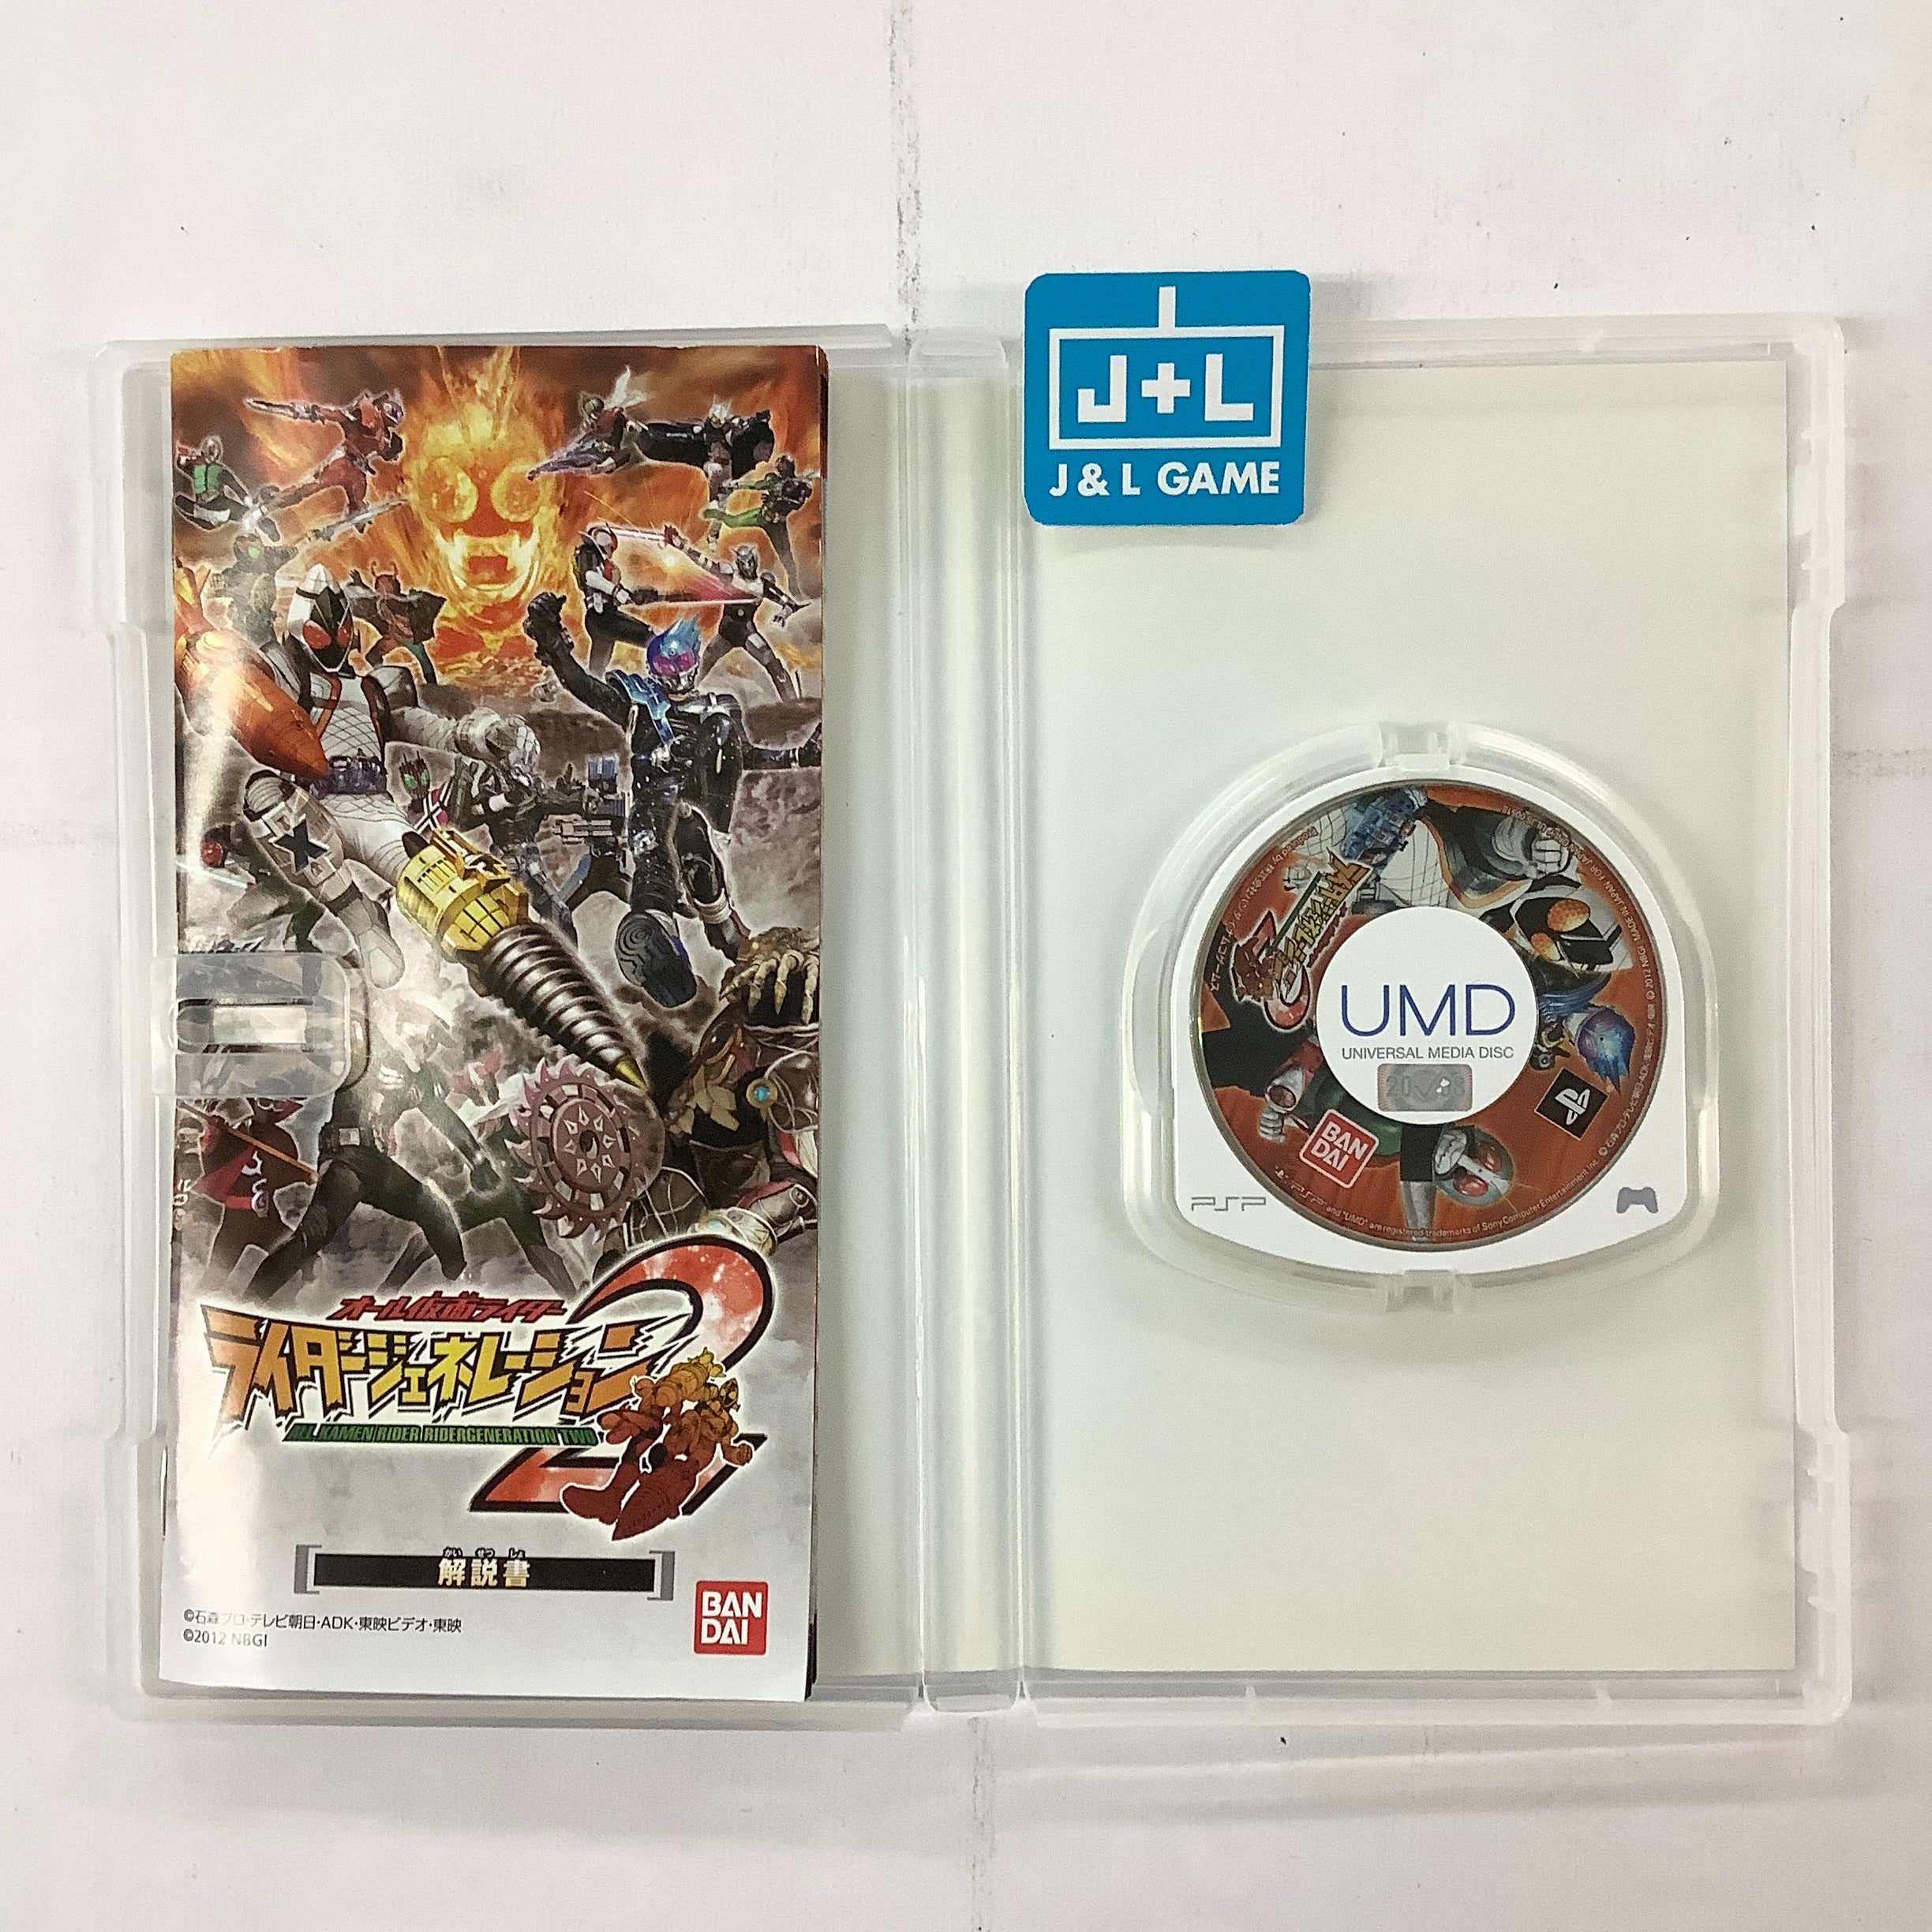 All Kamen Rider Rider Generation 2 - Sony PSP [Pre-Owned] (Japanese Import) Video Games BANDAI NAMCO Entertainment   